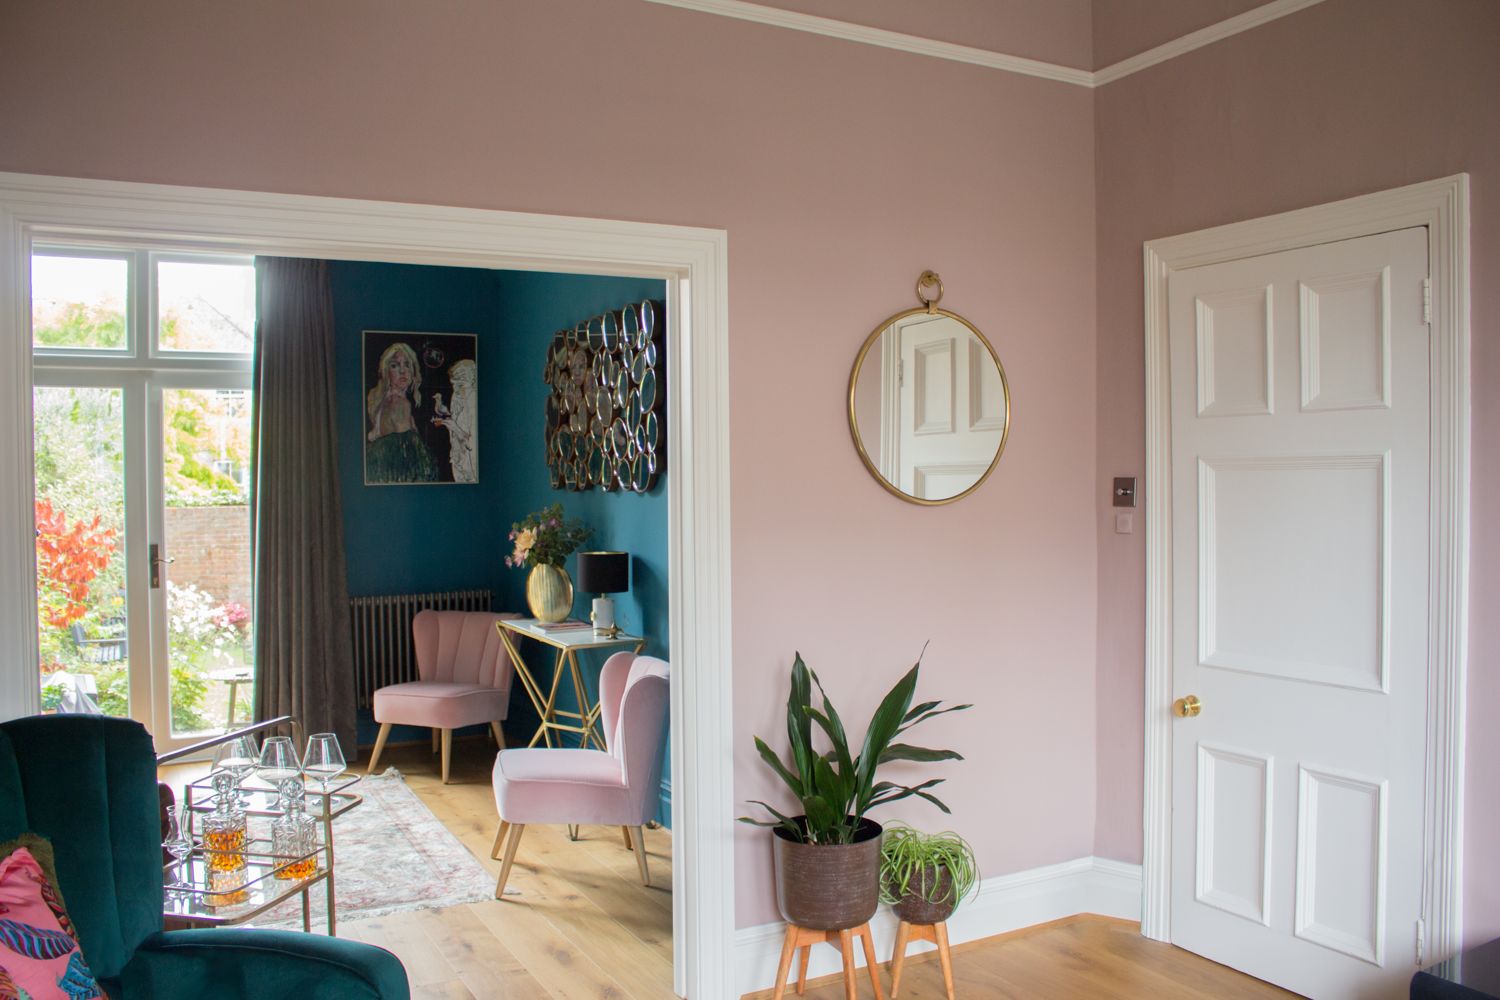 A photo of the knocked through reception rooms, one is painted teal and the other is painted pink, with sumptuous velvet furniture.